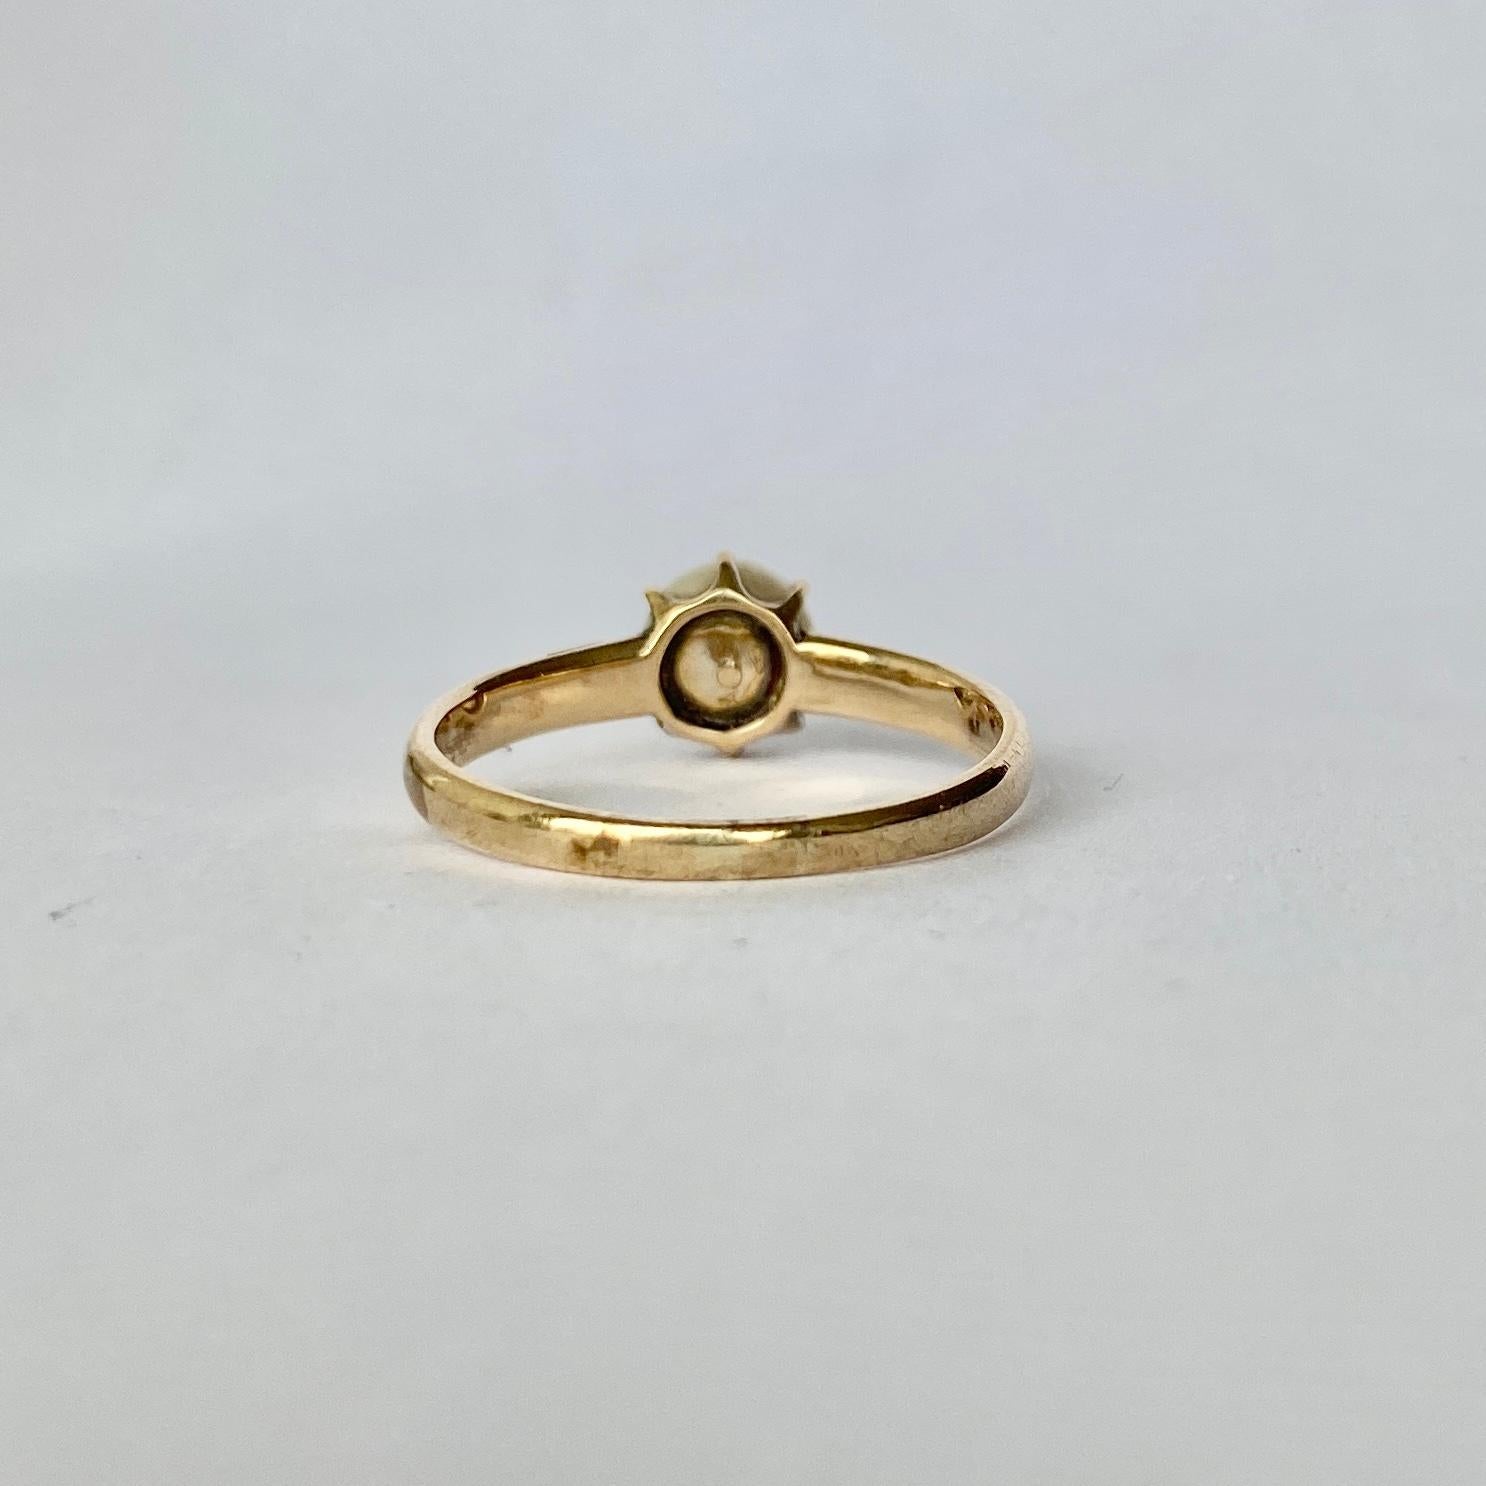 Perched up high in a simple claw setting is a cultured pearl measuring 6mm in diameter. Modelled in 9carat gold. 

Ring Size: M or 6 1/4 
Height From Finger: 6mm 

Weight: 2.1g